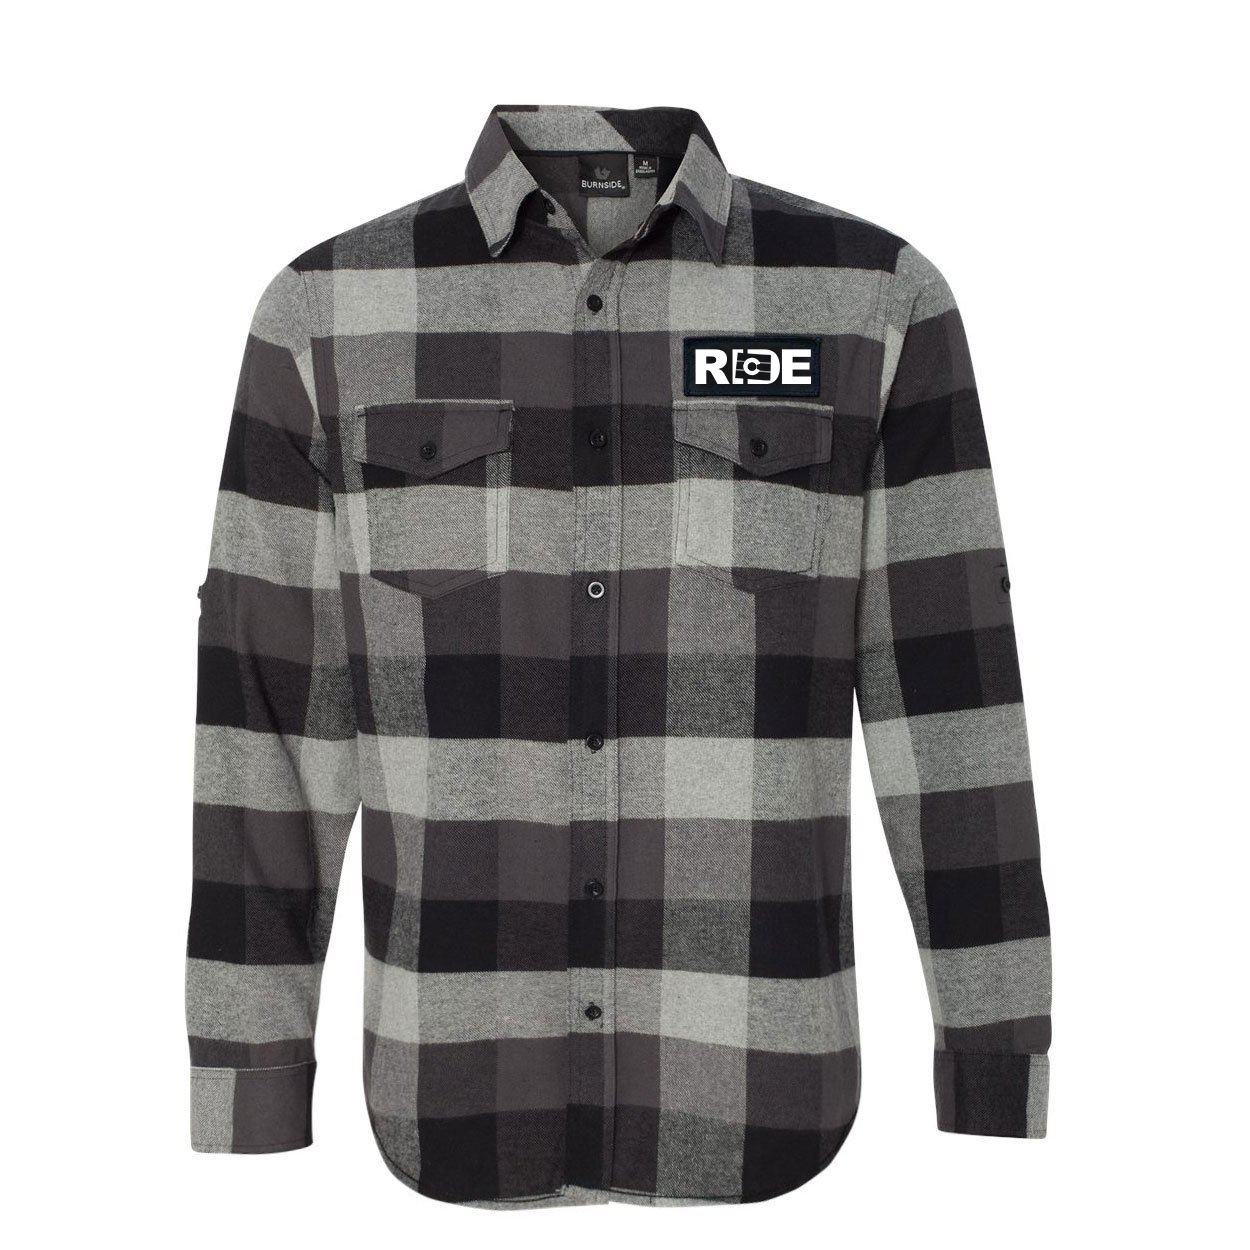 Ride Colorado Classic Unisex Long Sleeve Woven Patch Flannel Shirt Black/Gray (White Logo)